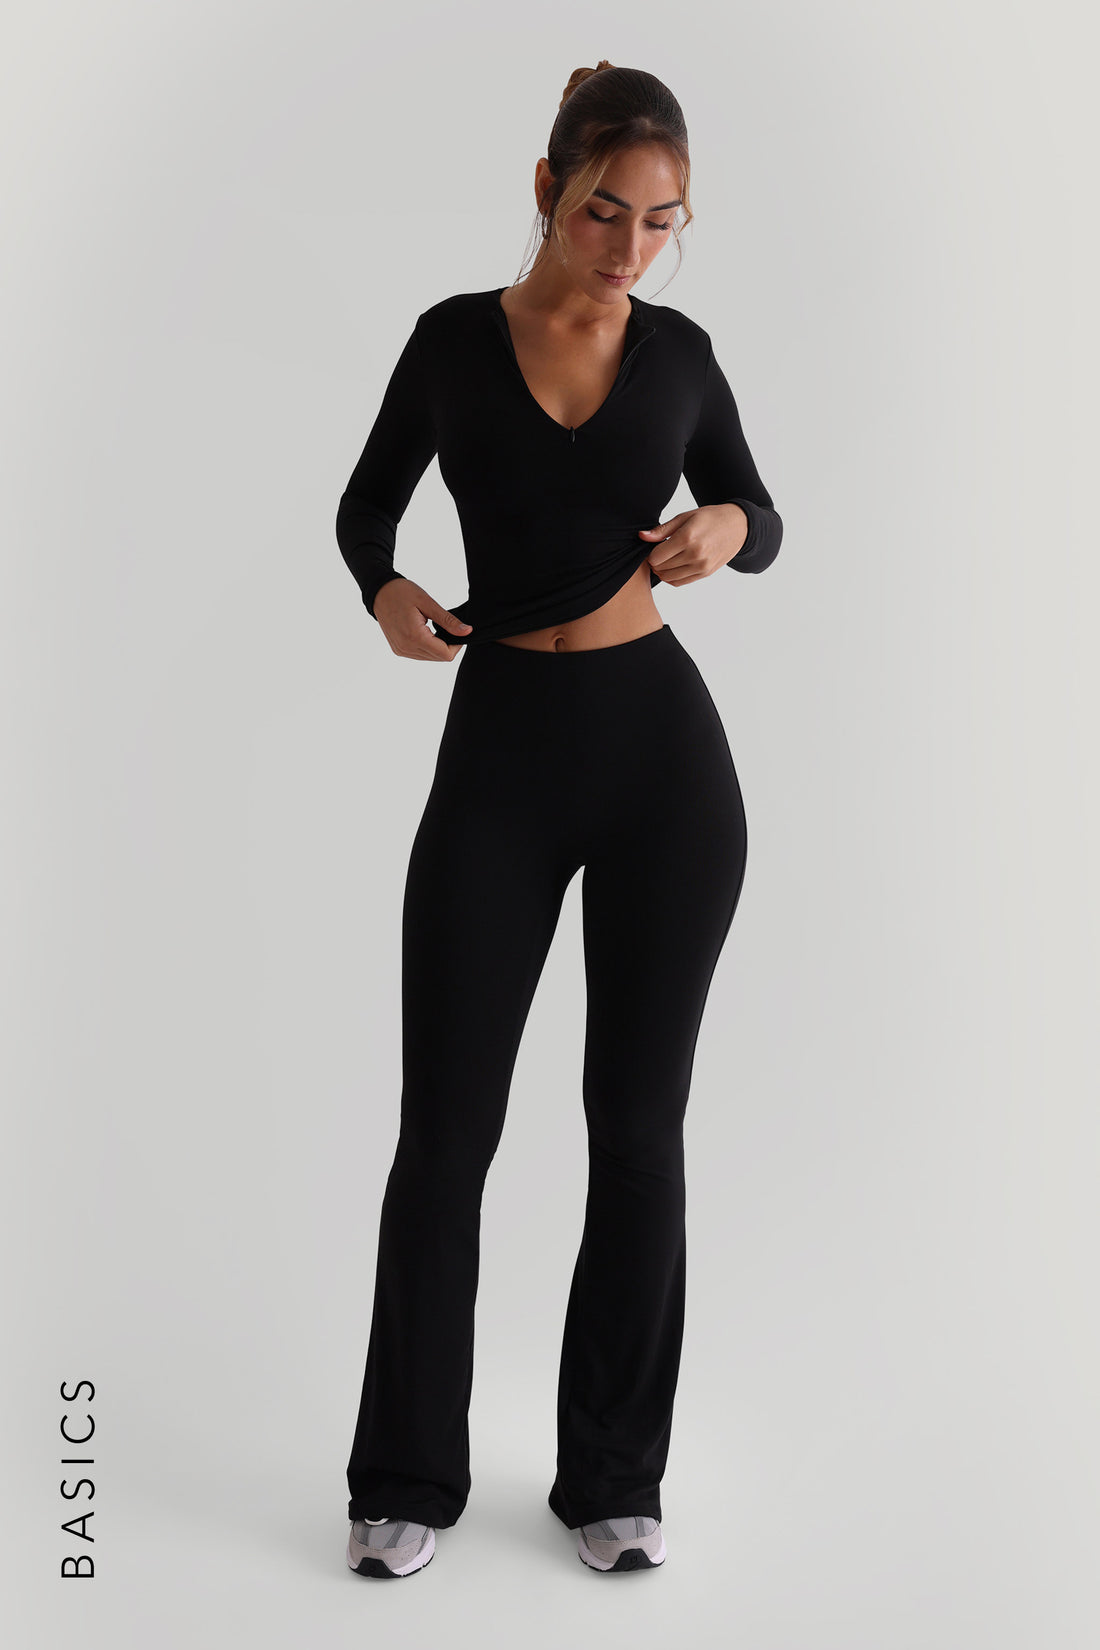 Pro-Technical Leggings - Black – My Outfit Online